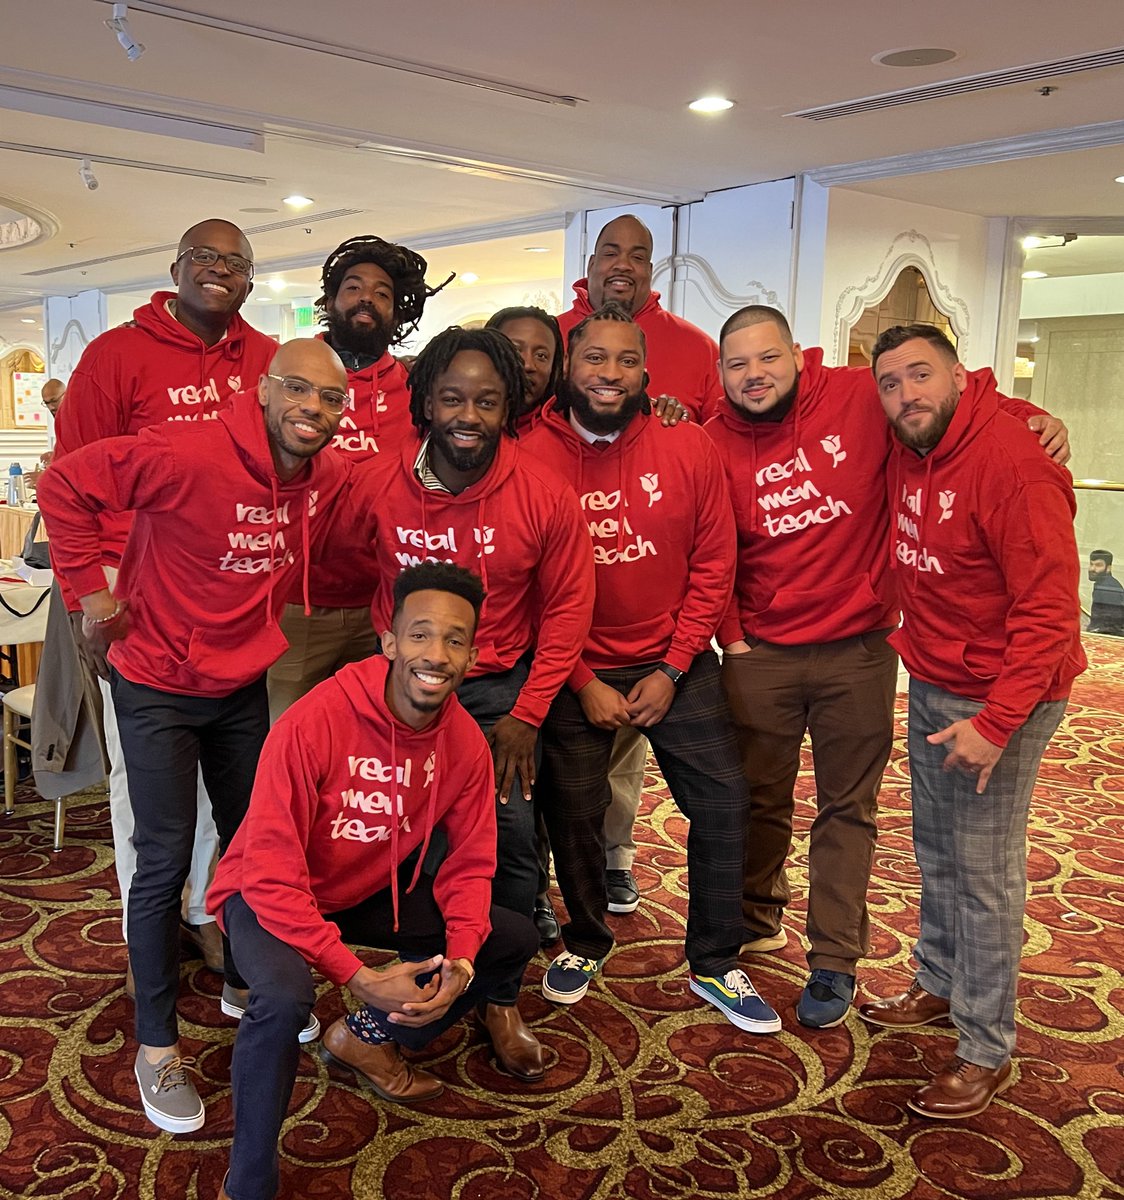 Amazing weekend with the National Fellowship for Black and Latino Male Educators. @RealMenTeach2 the drip is 🔥🔥🔥 #NFBLME #blackmaleeducators #latinomaleeducators